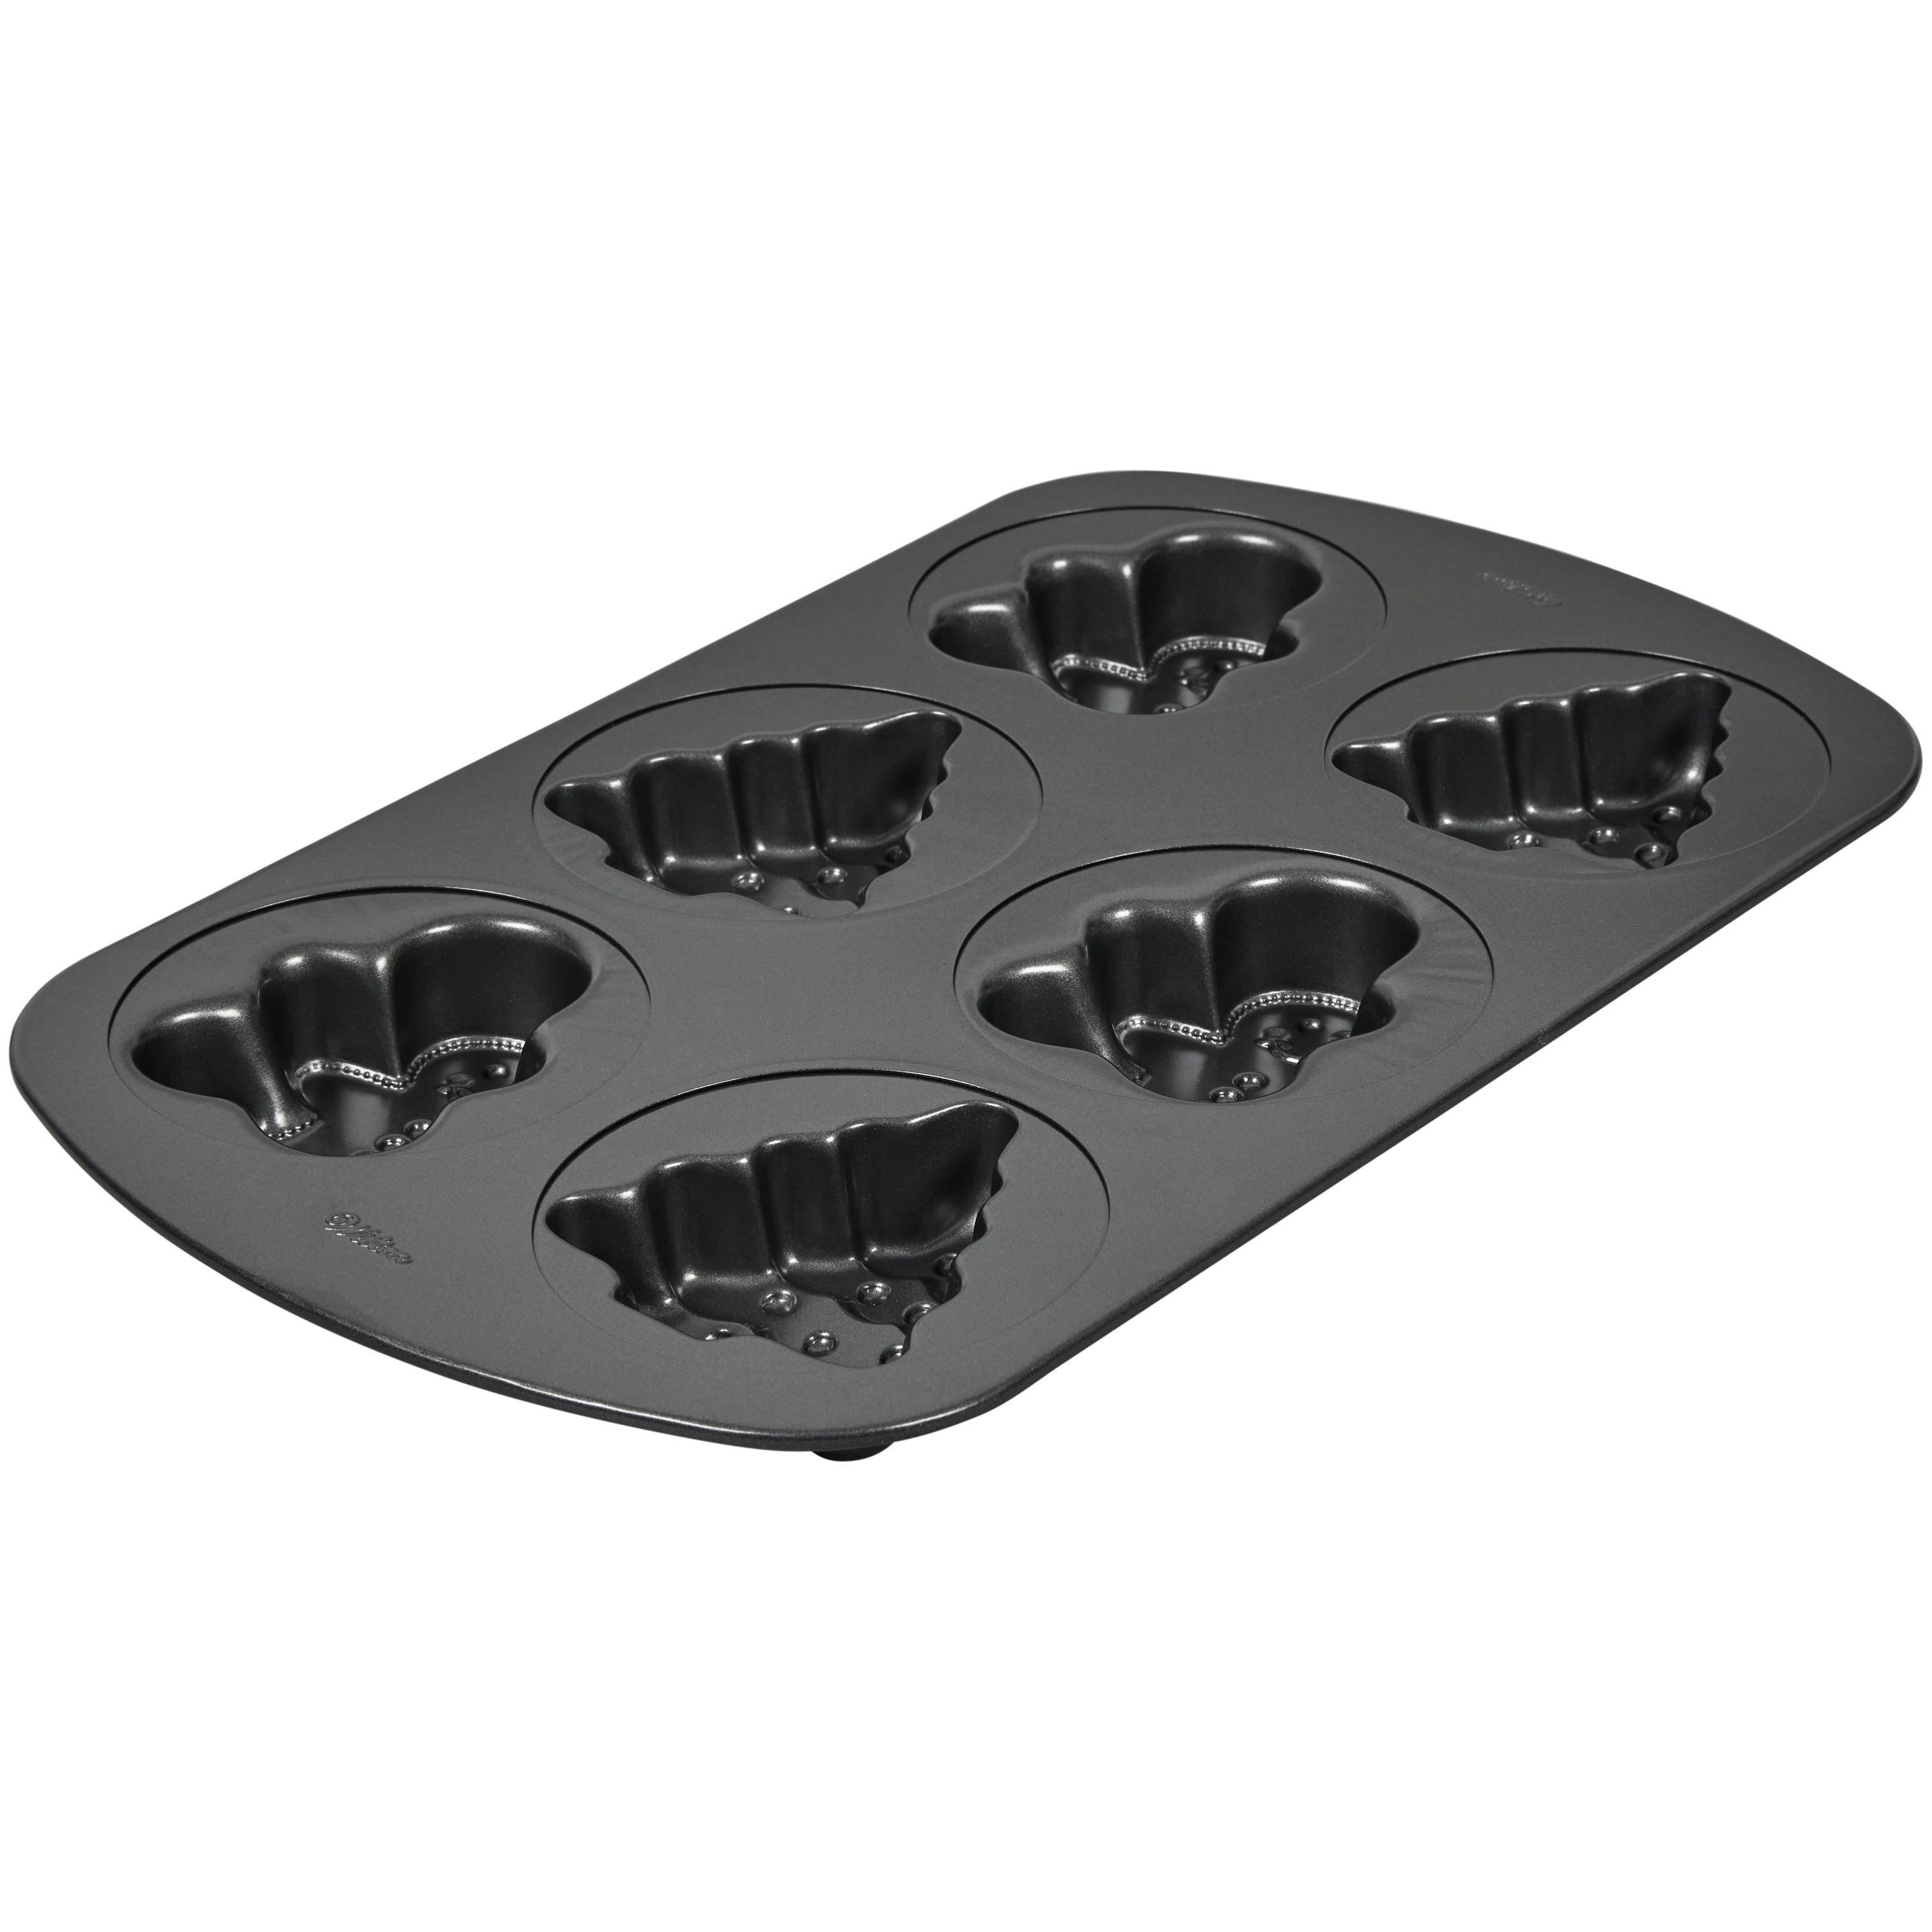 Wehome Gingerbread Cake Pan Cakelet Pan，Non-stick Cast Aluminum Muffin  Pan，12-Cavity Snowman and Christmas Tree Gingerbread Baking Pan，Heavy-gauge